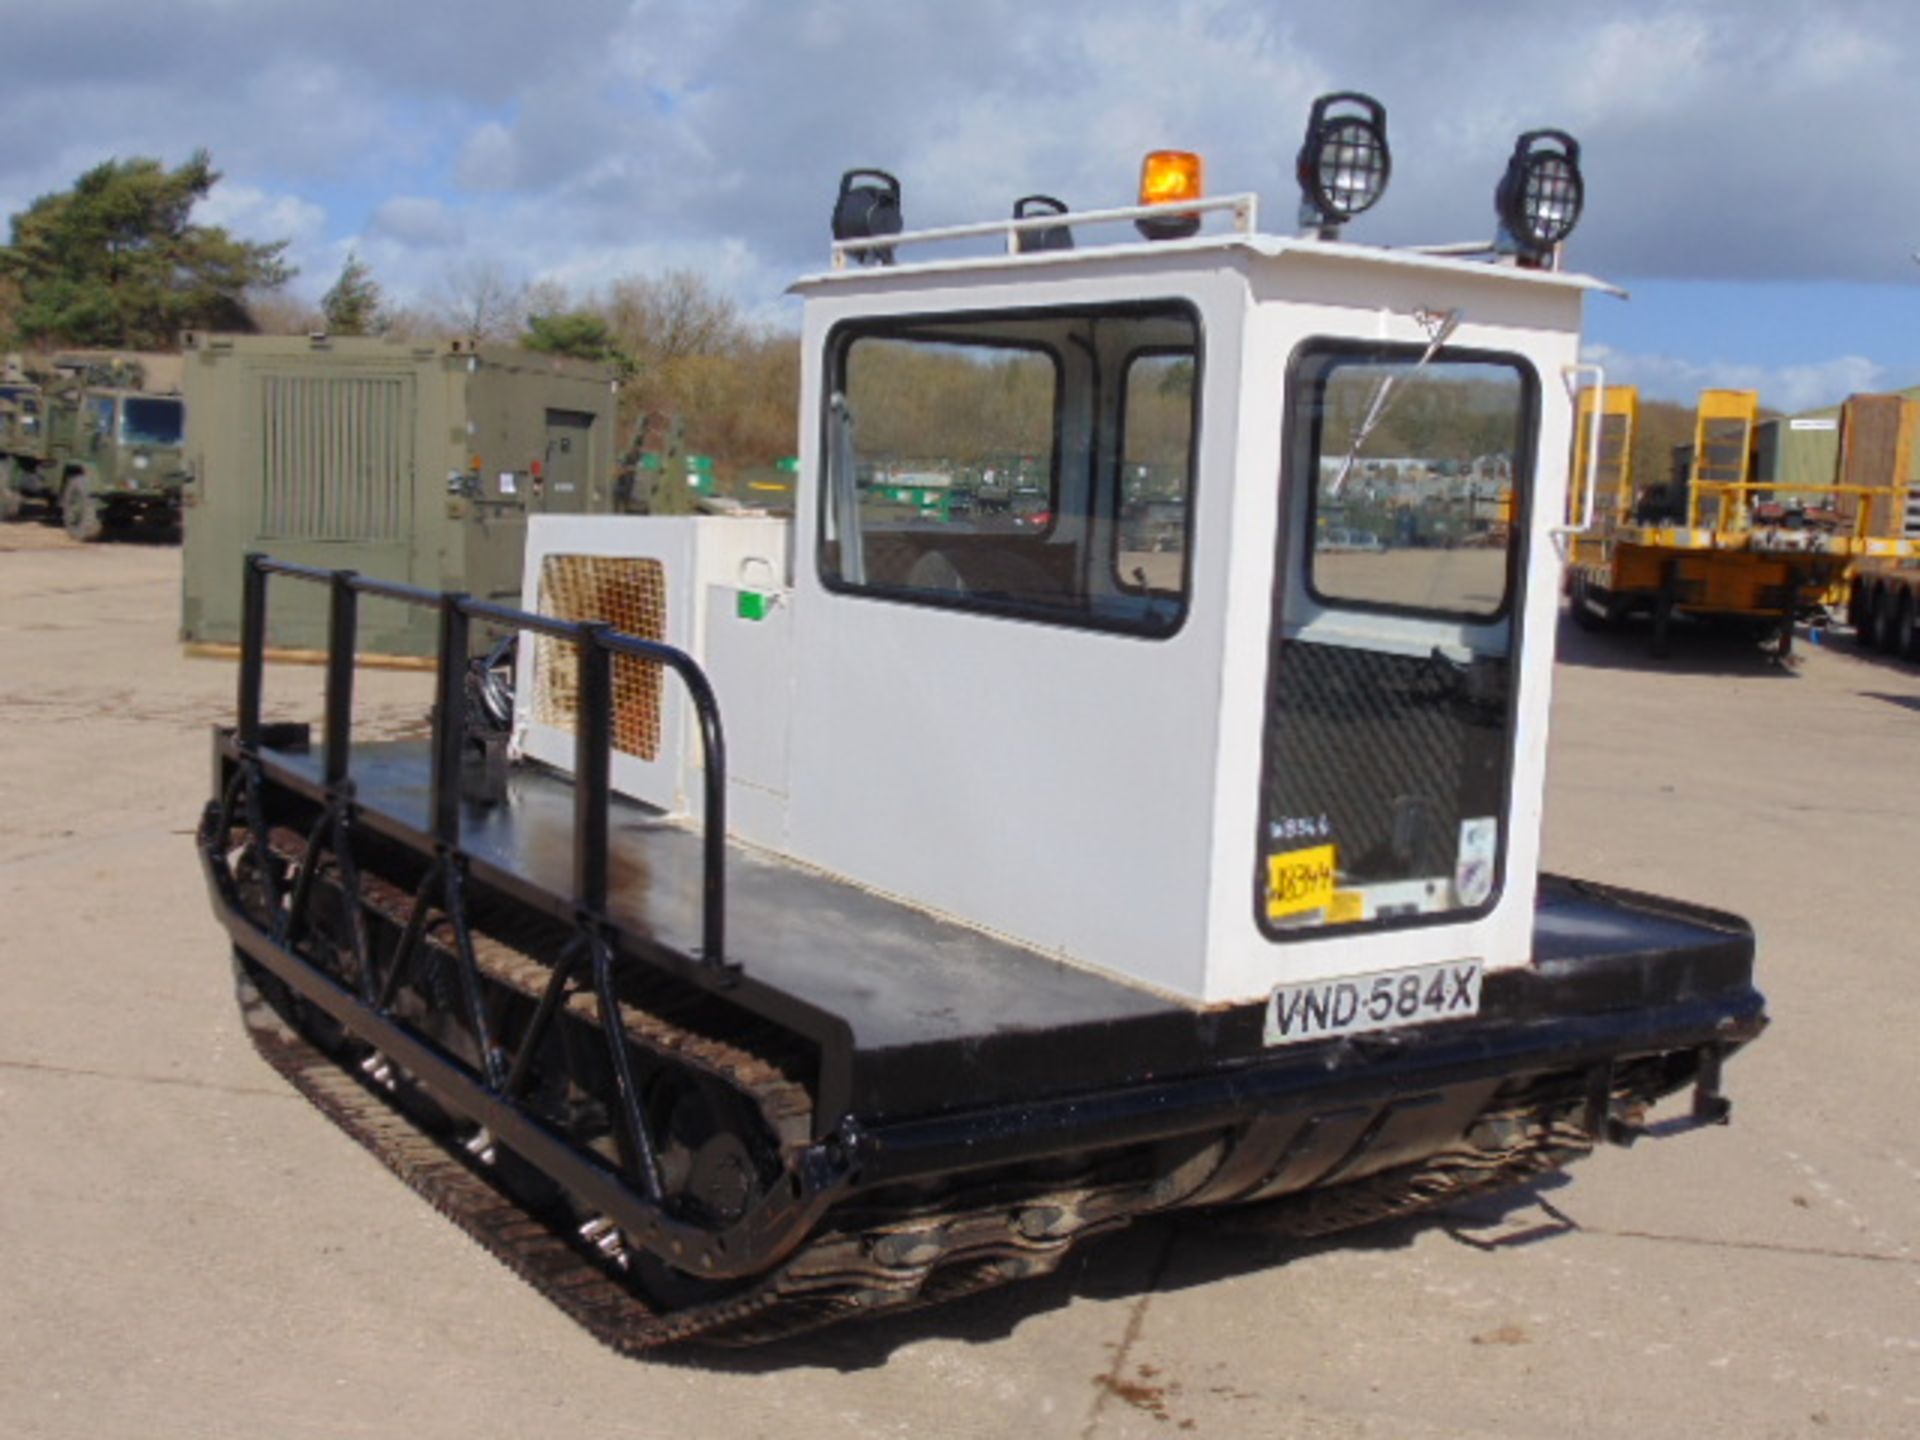 Rolba Bombardier Muskeg MM 80 All Terrain Tracked Vehicle with Rear Mounted Boughton Winch